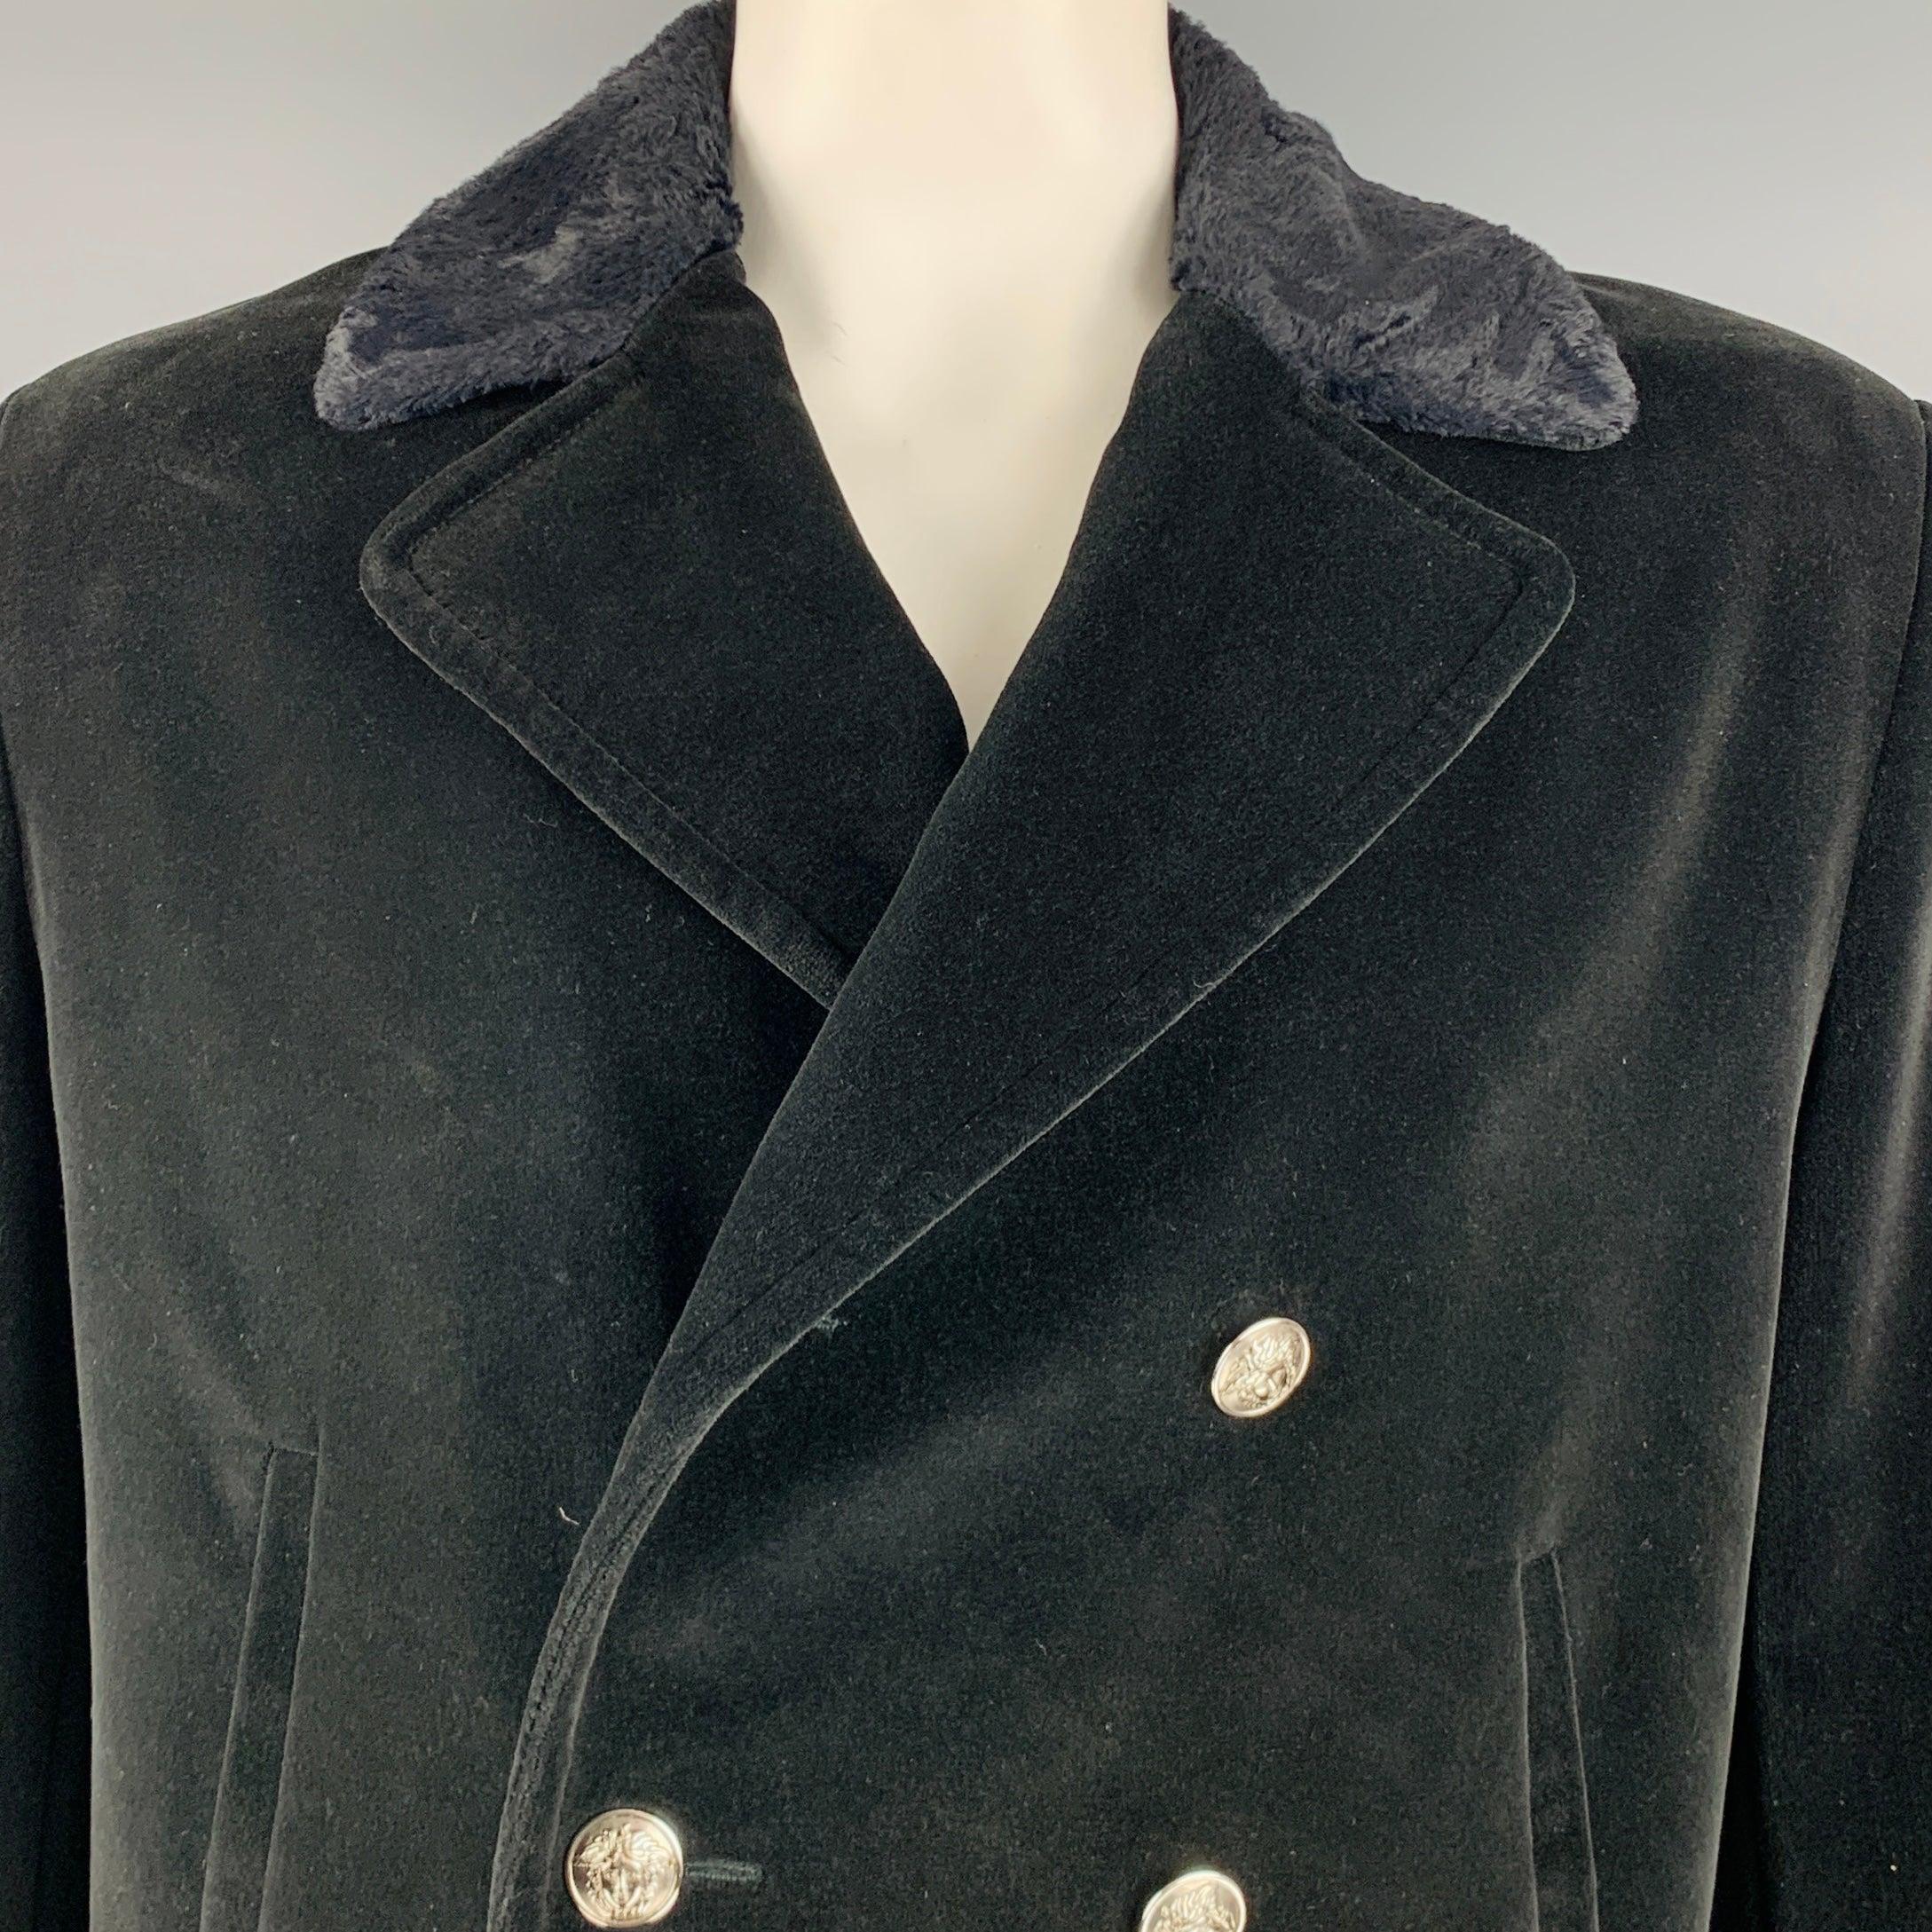 VERSACE JEANS COUTURE coat
in a black cotton velvet fabric featuring a double breasted style, faux fur trim, and button closure signature silver tone Medusa buttons.
Comes with removable back belt. Made in Italy.Very Good Pre-Owned Condition.